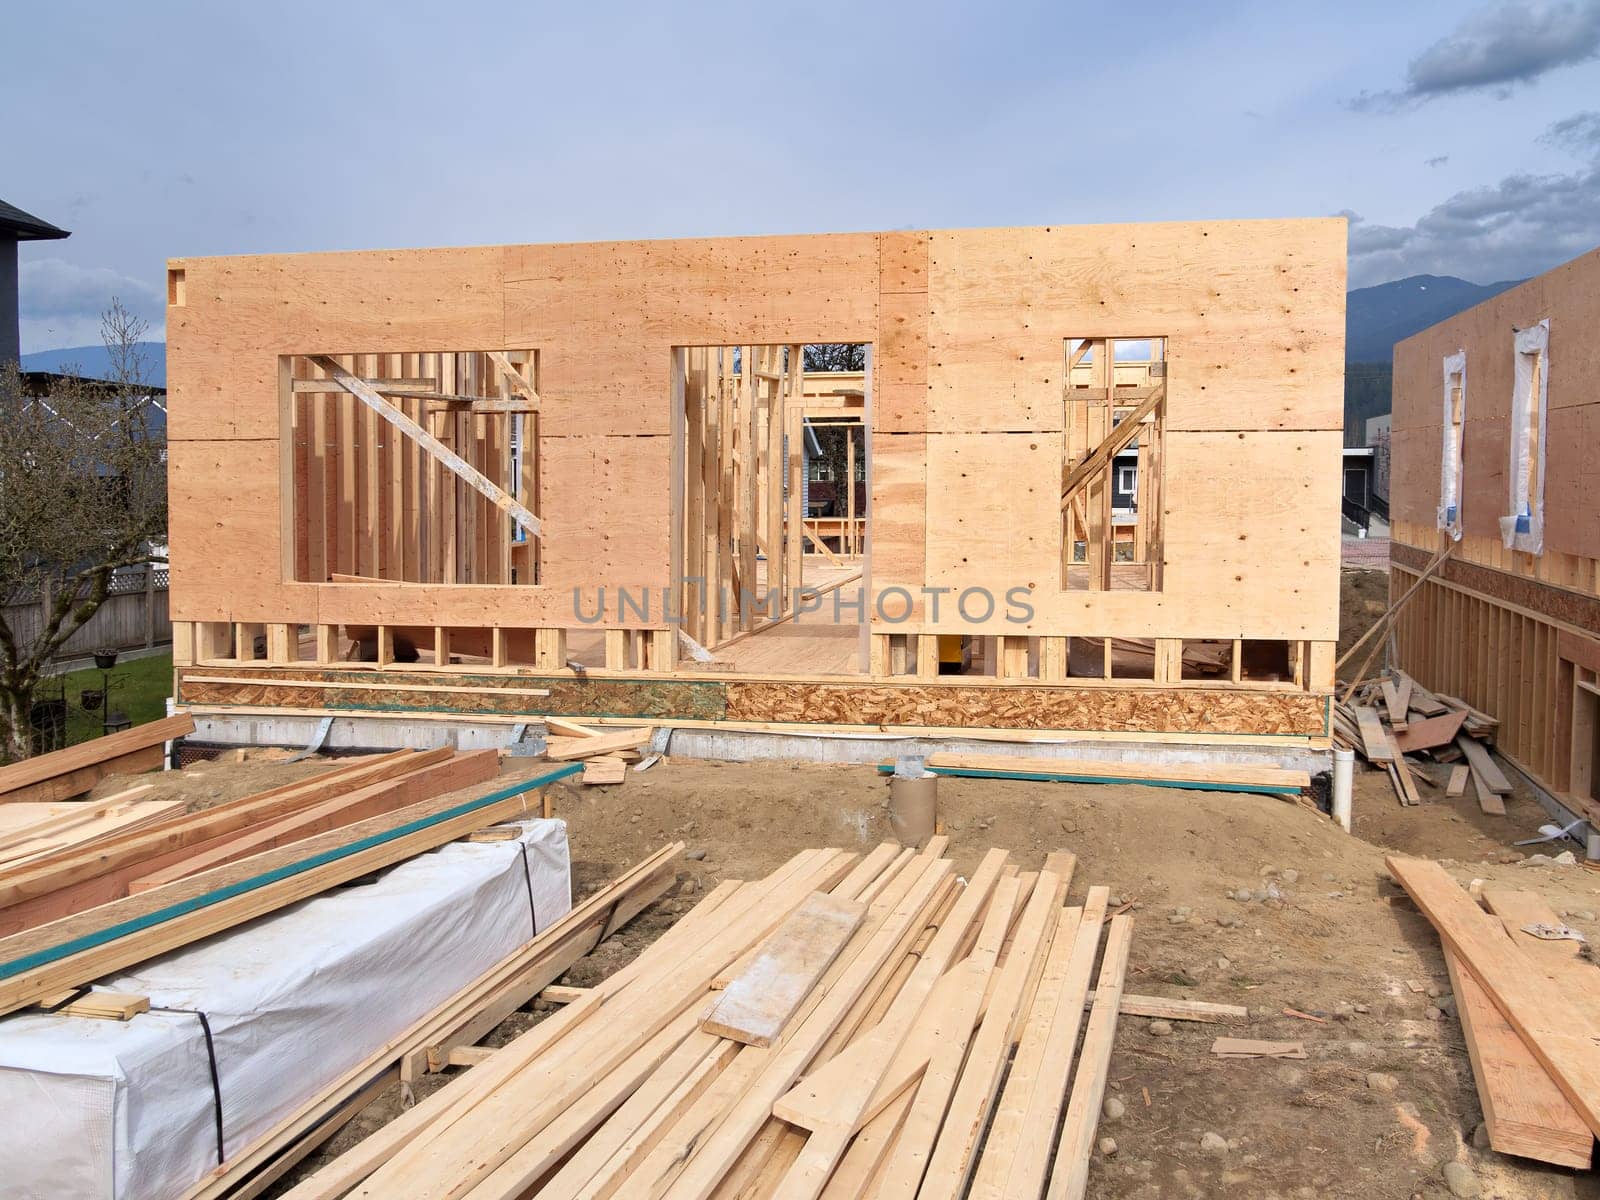 Wooden frame of a new house with engineered lumber materials prepared for the construction. Two by four lumber wood